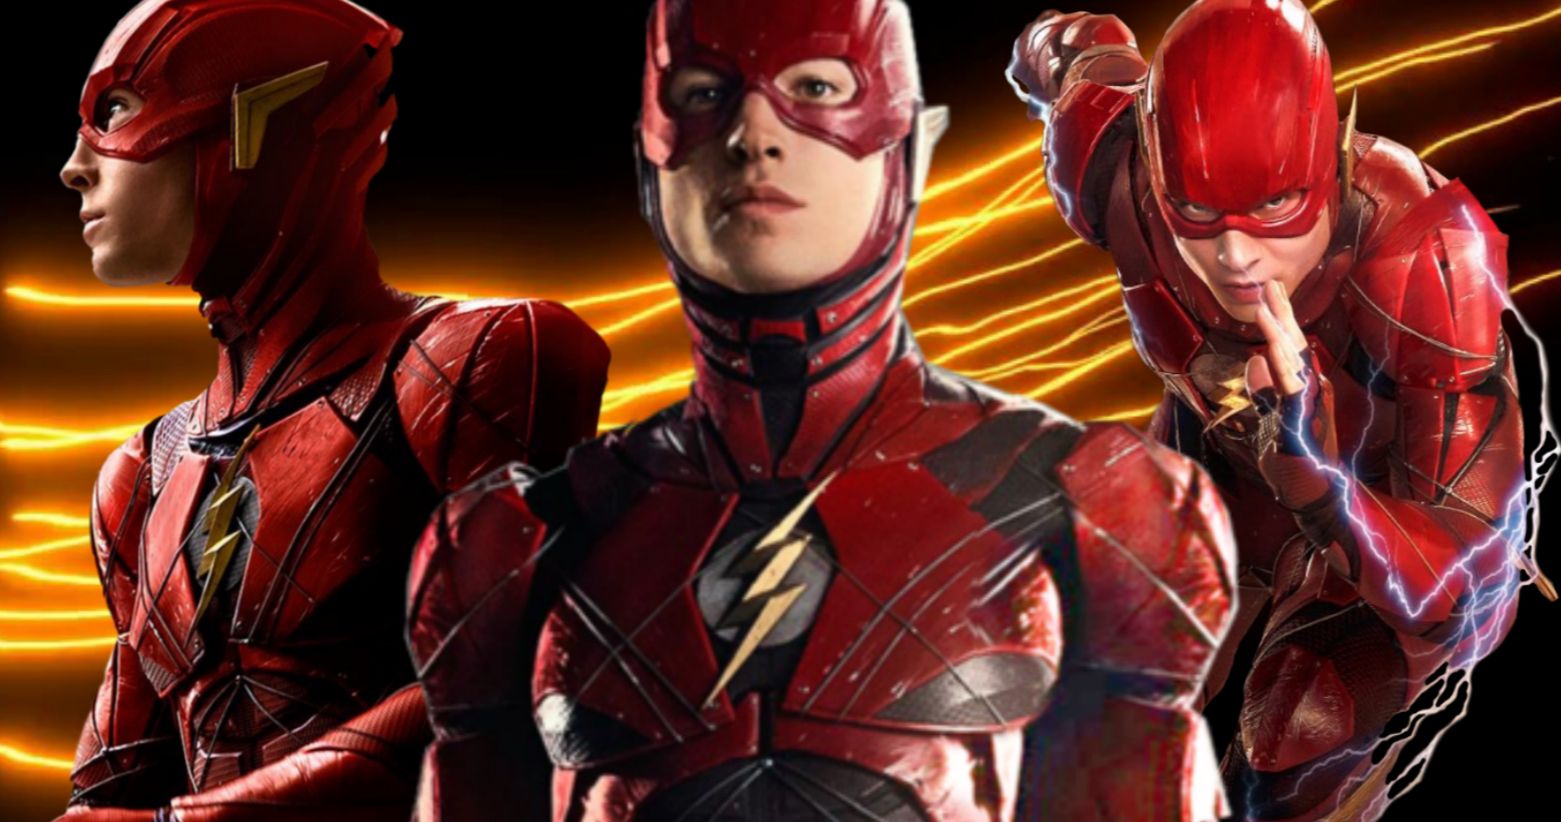 The Flash Movie Sets New 2022 Release Date, Will It Stick?